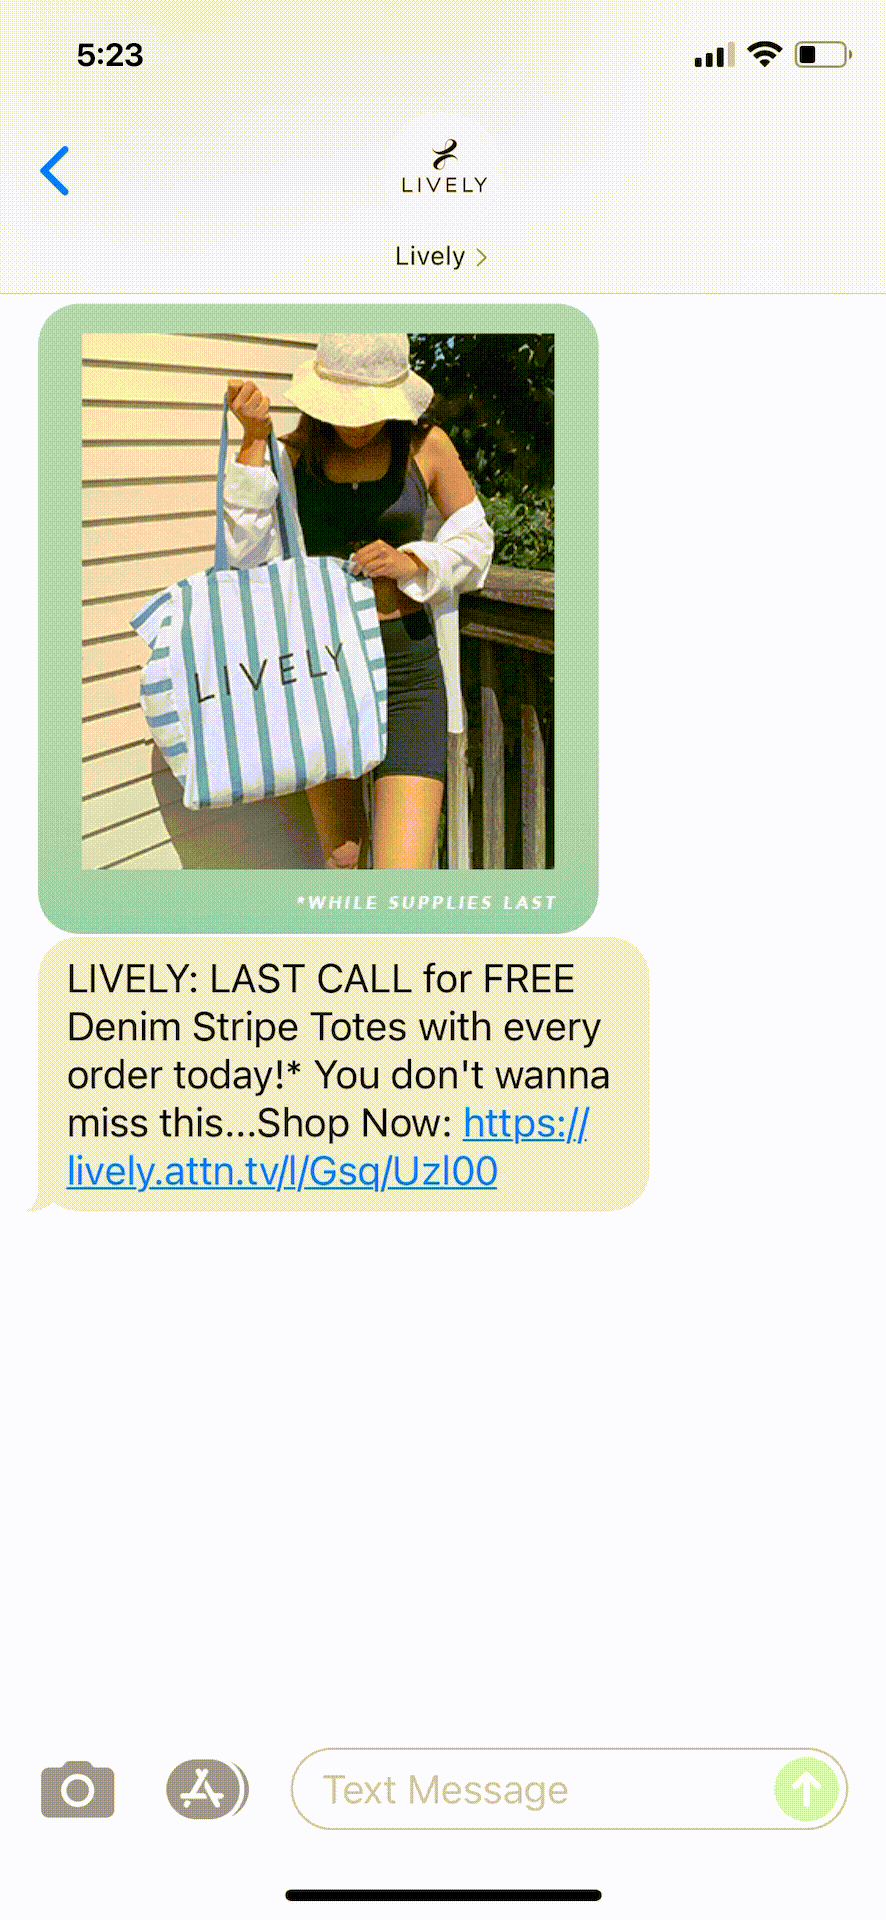 Lively-Text-Message-Marketing-Example-07.25.2021